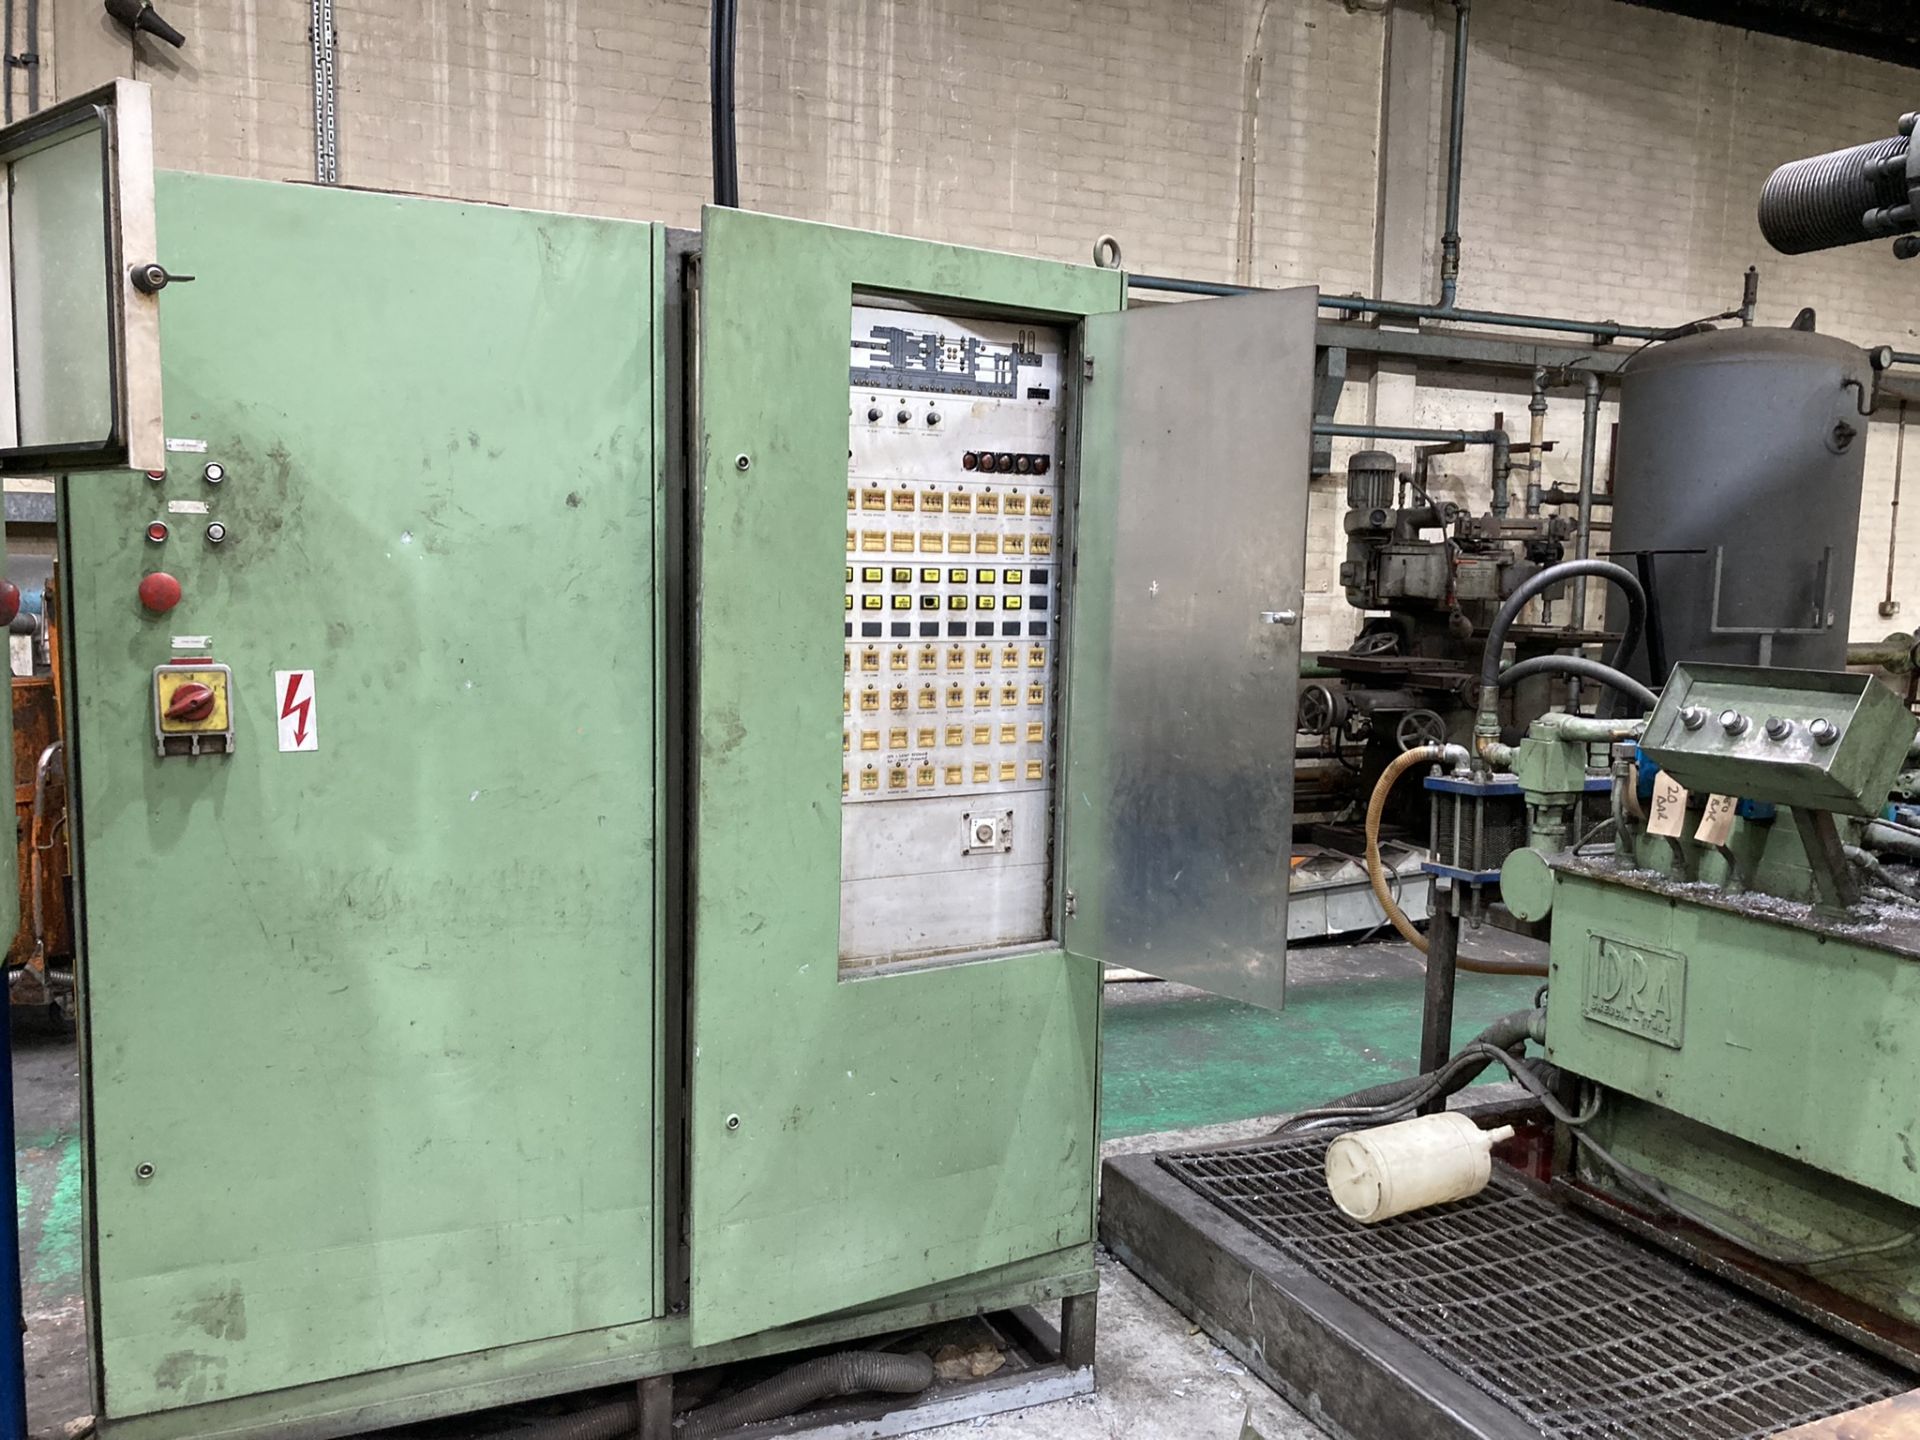 1 Idra, 700-S, Die-casting machine with Unbranded - Image 4 of 4